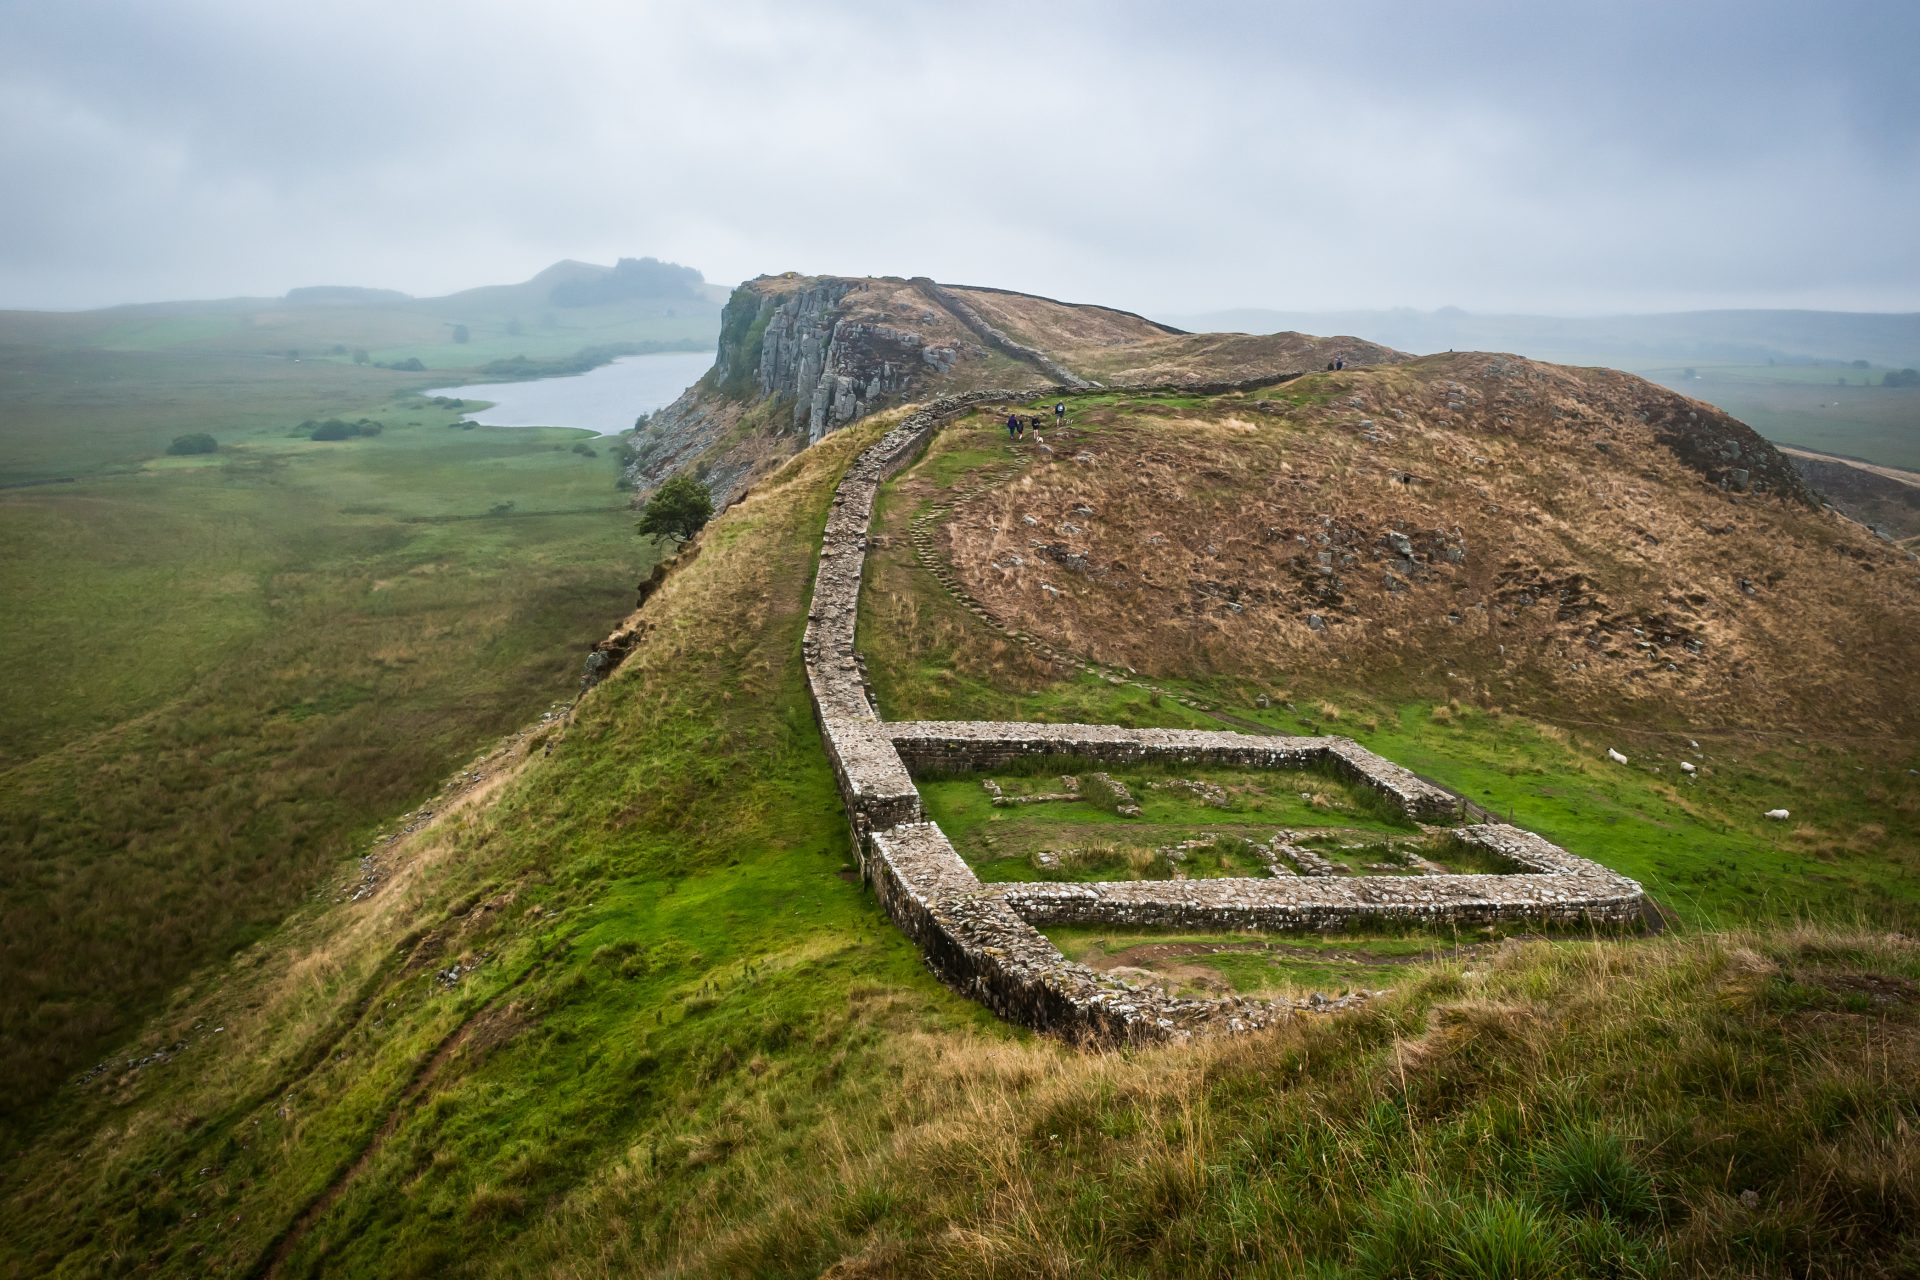 <p>This 135-kilometer trail follows Hadrian's Wall, a stone fortification built in Roman times, listed as a UNESCO World Heritage Site. The tour takes place in the middle of the British countryside and the historical remains of the United Kingdom. It is undoubtedly the easiest hike in the country, but also one of its richest, culturally.</p>